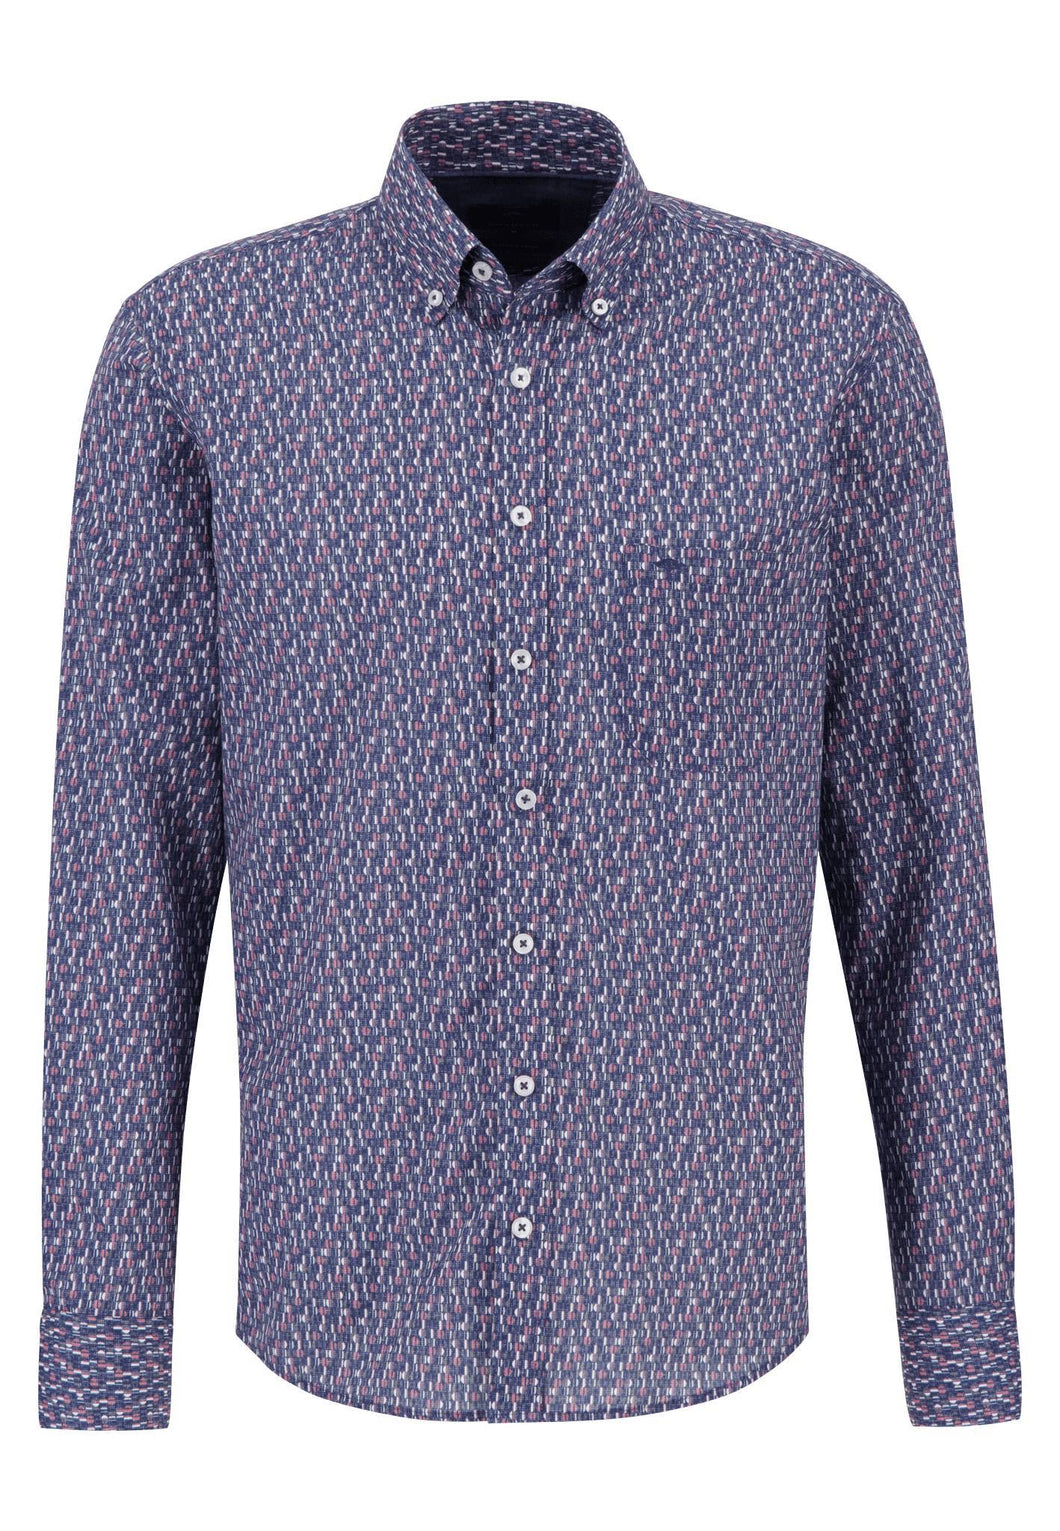 New Fynch Hatton Blue and Pink Pattern Long Sleeve Shirt